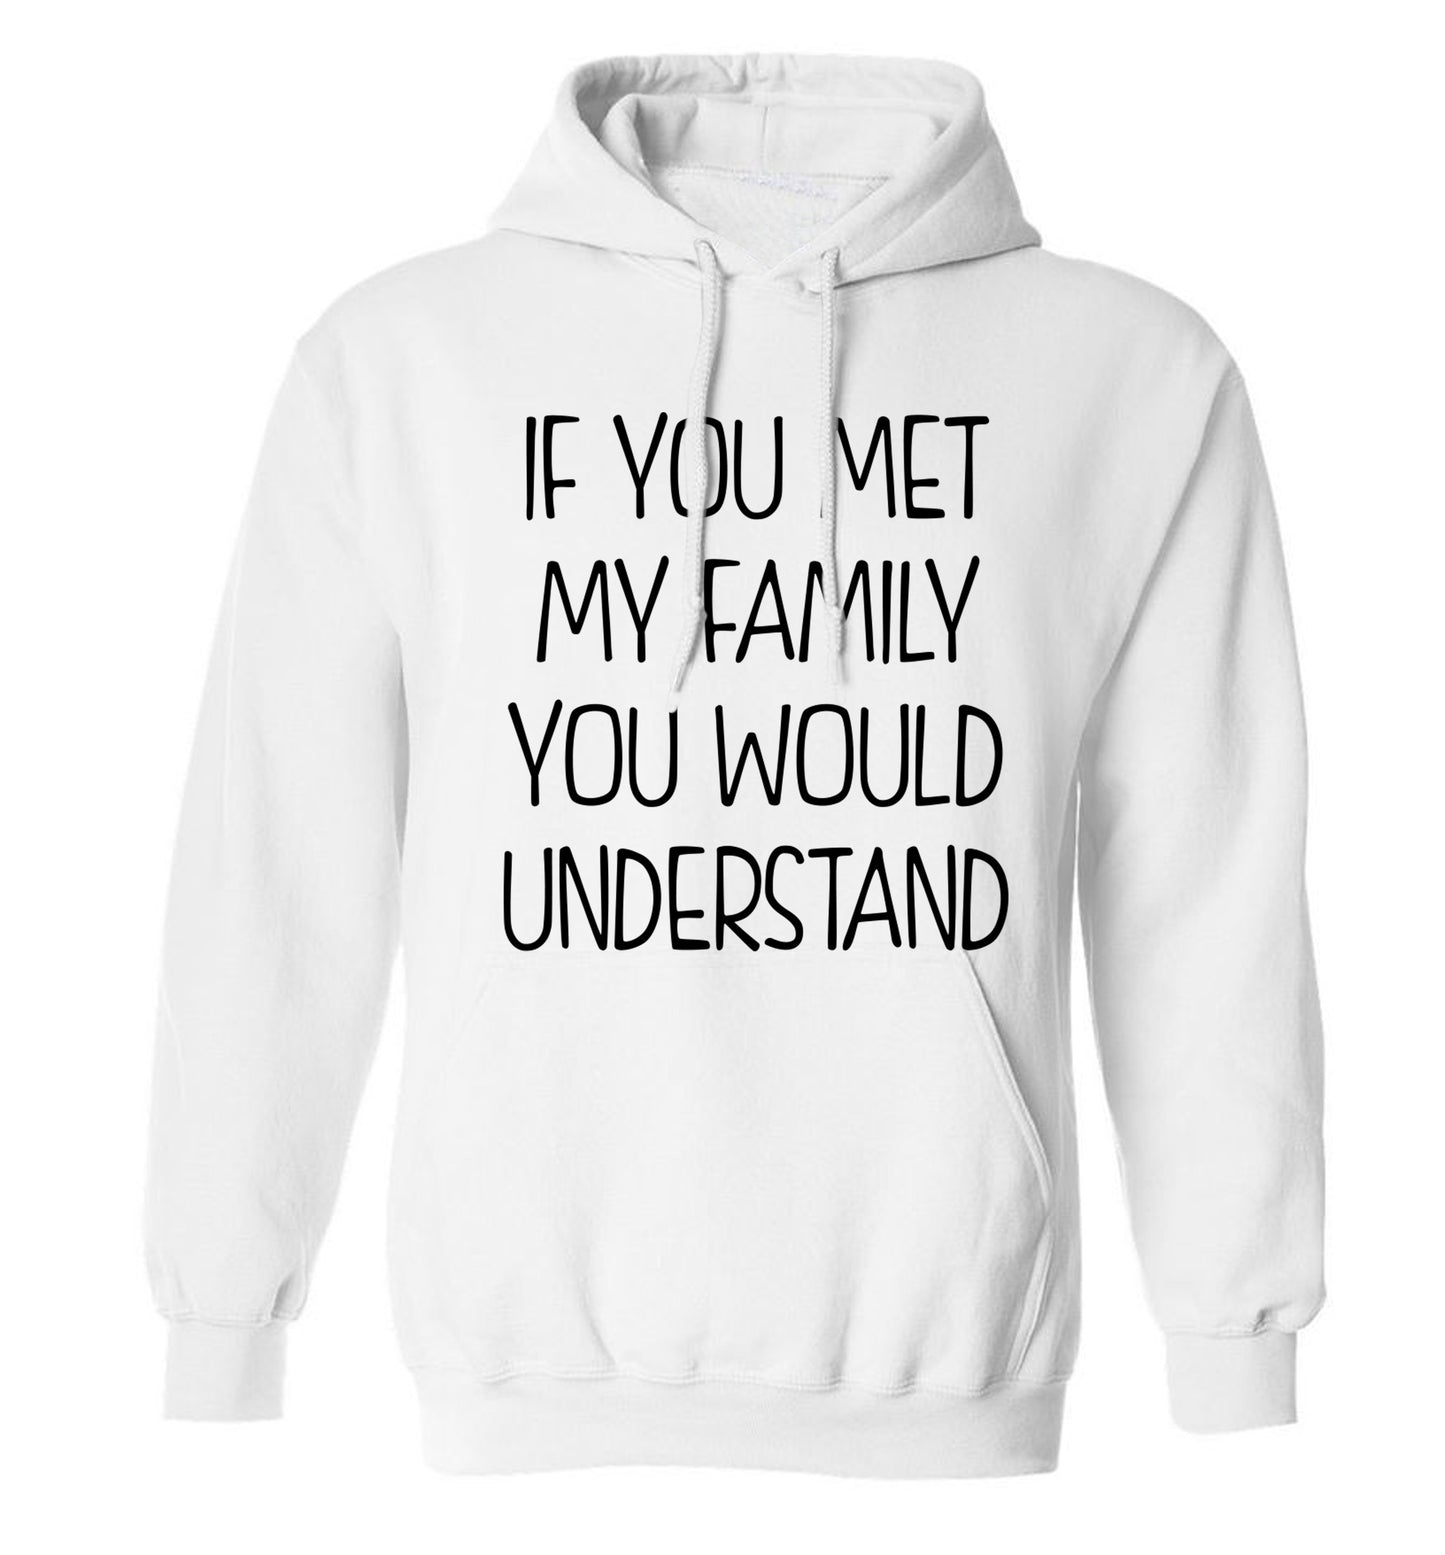 If you met my family you would understand adults unisex white hoodie 2XL